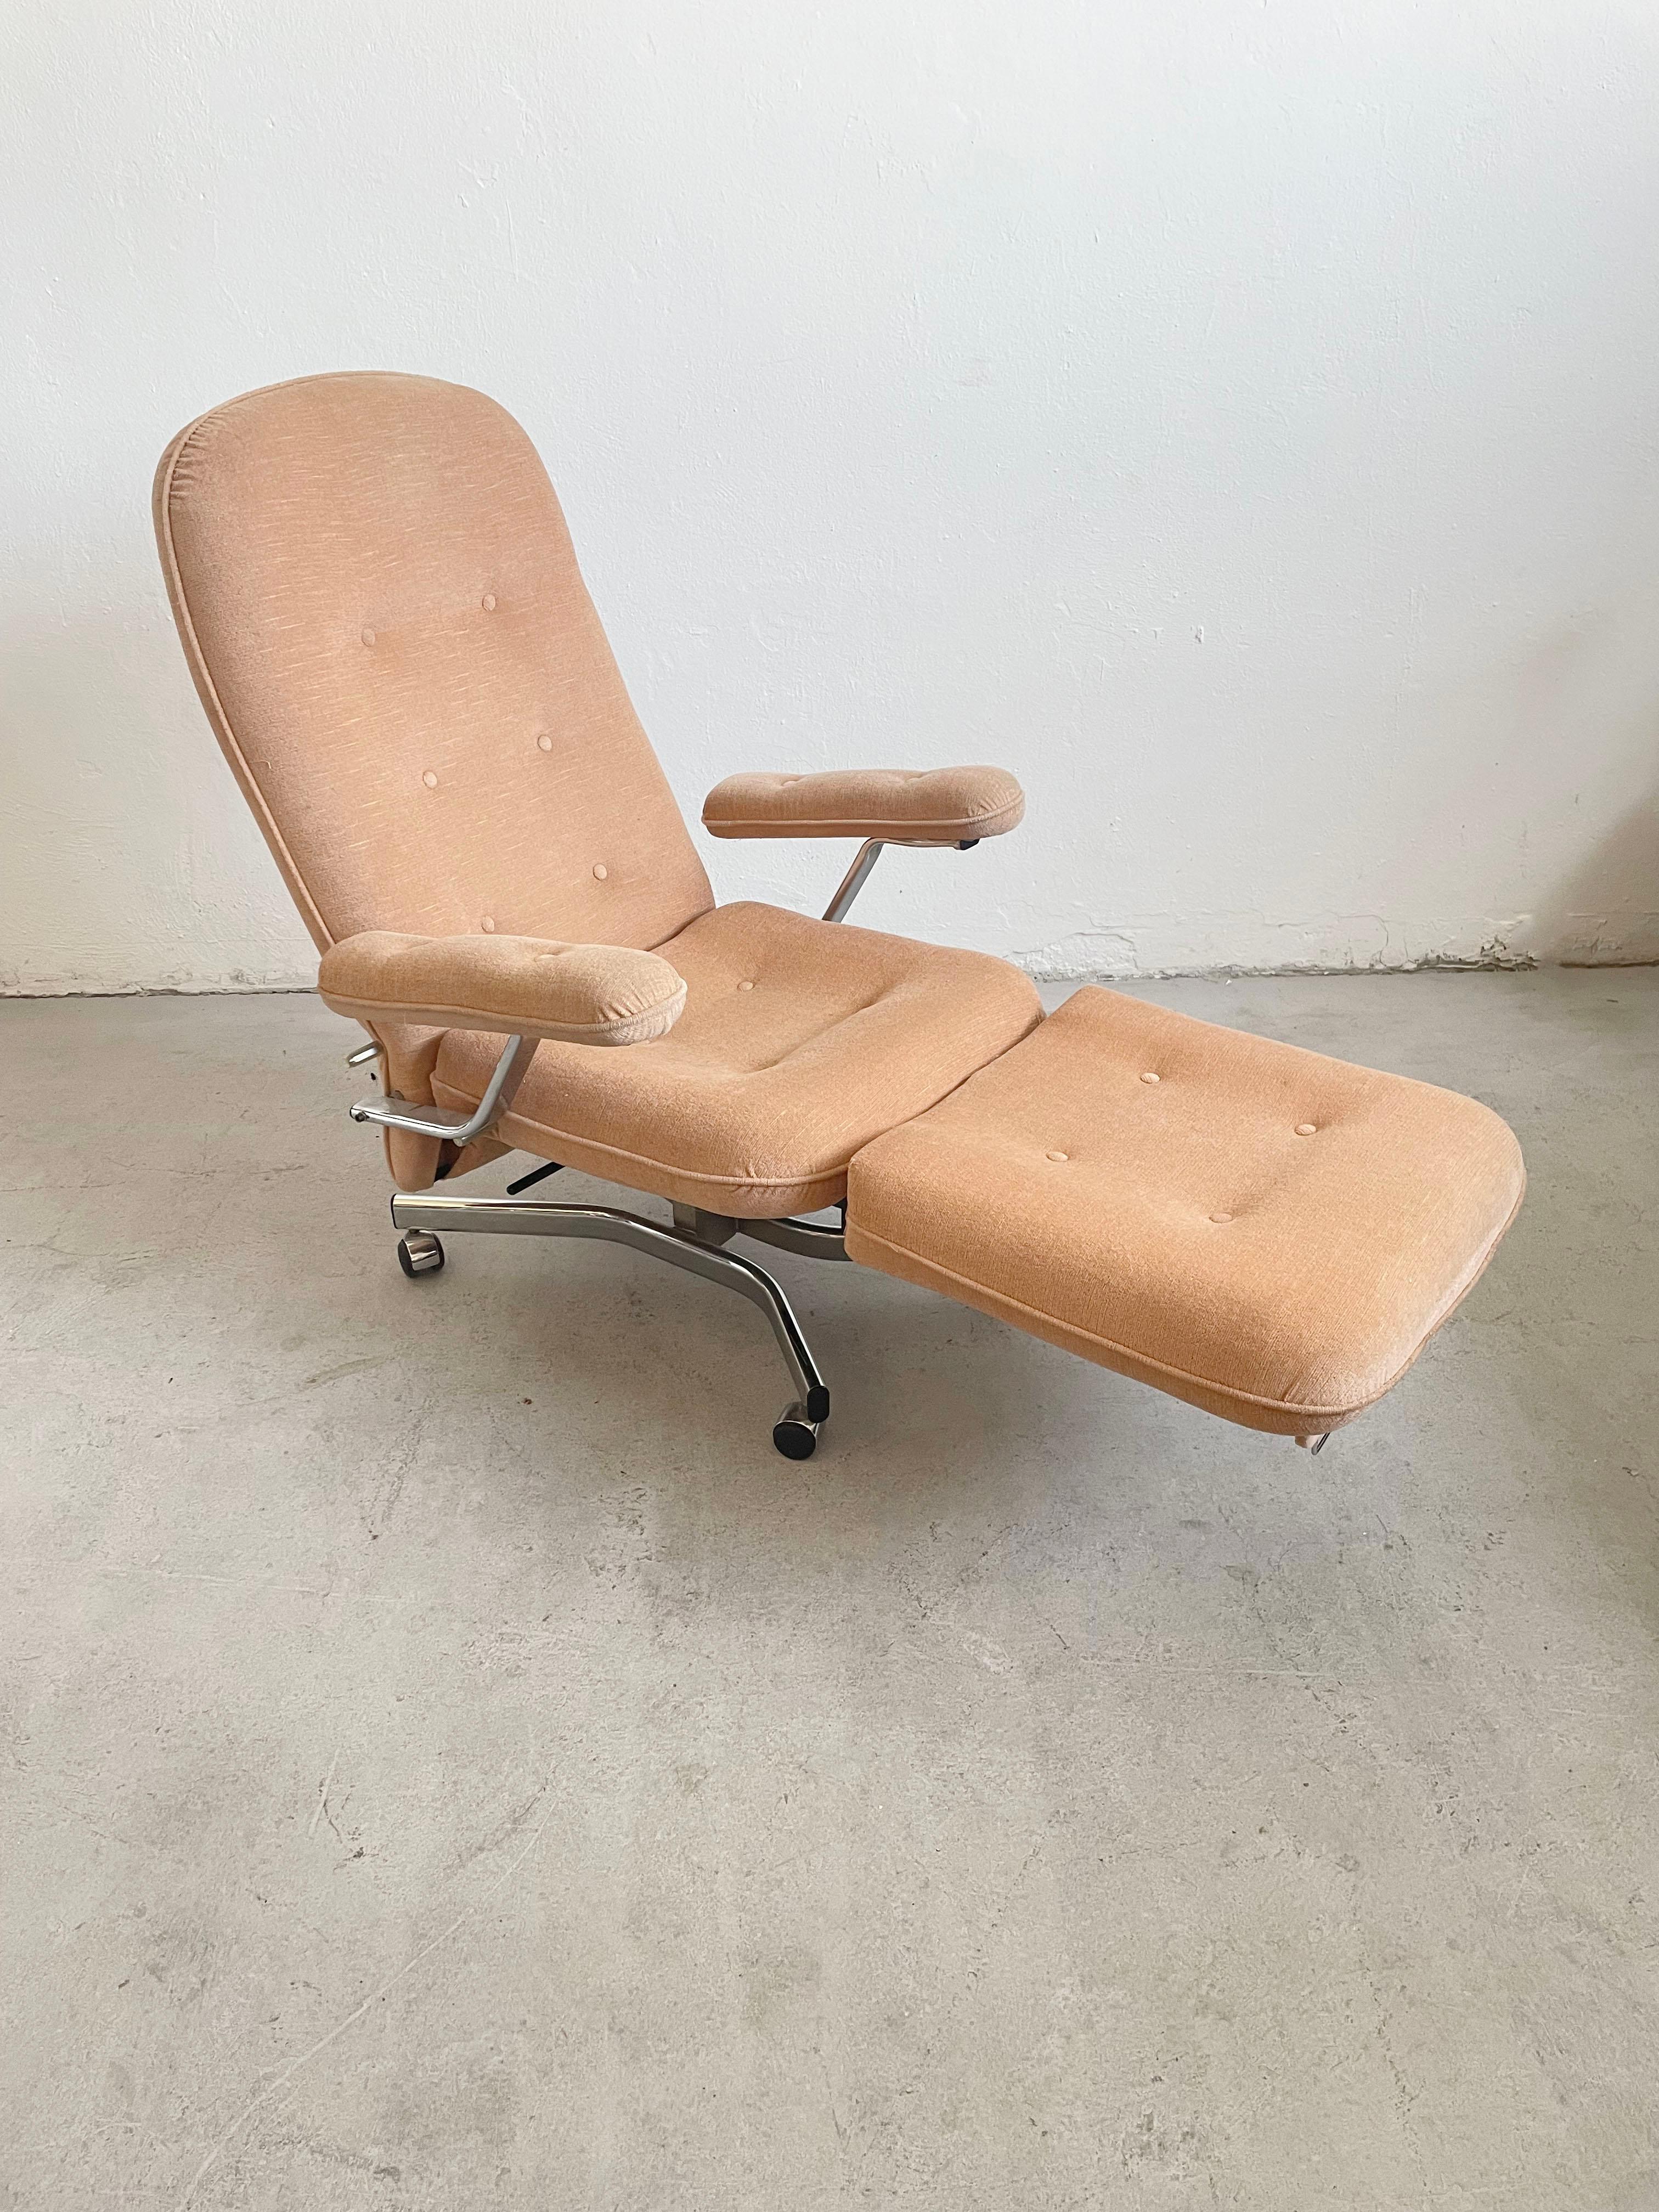 Vintage Everstyl Armchair Convertible and Multi-functional Recliner France 1970s For Sale 2